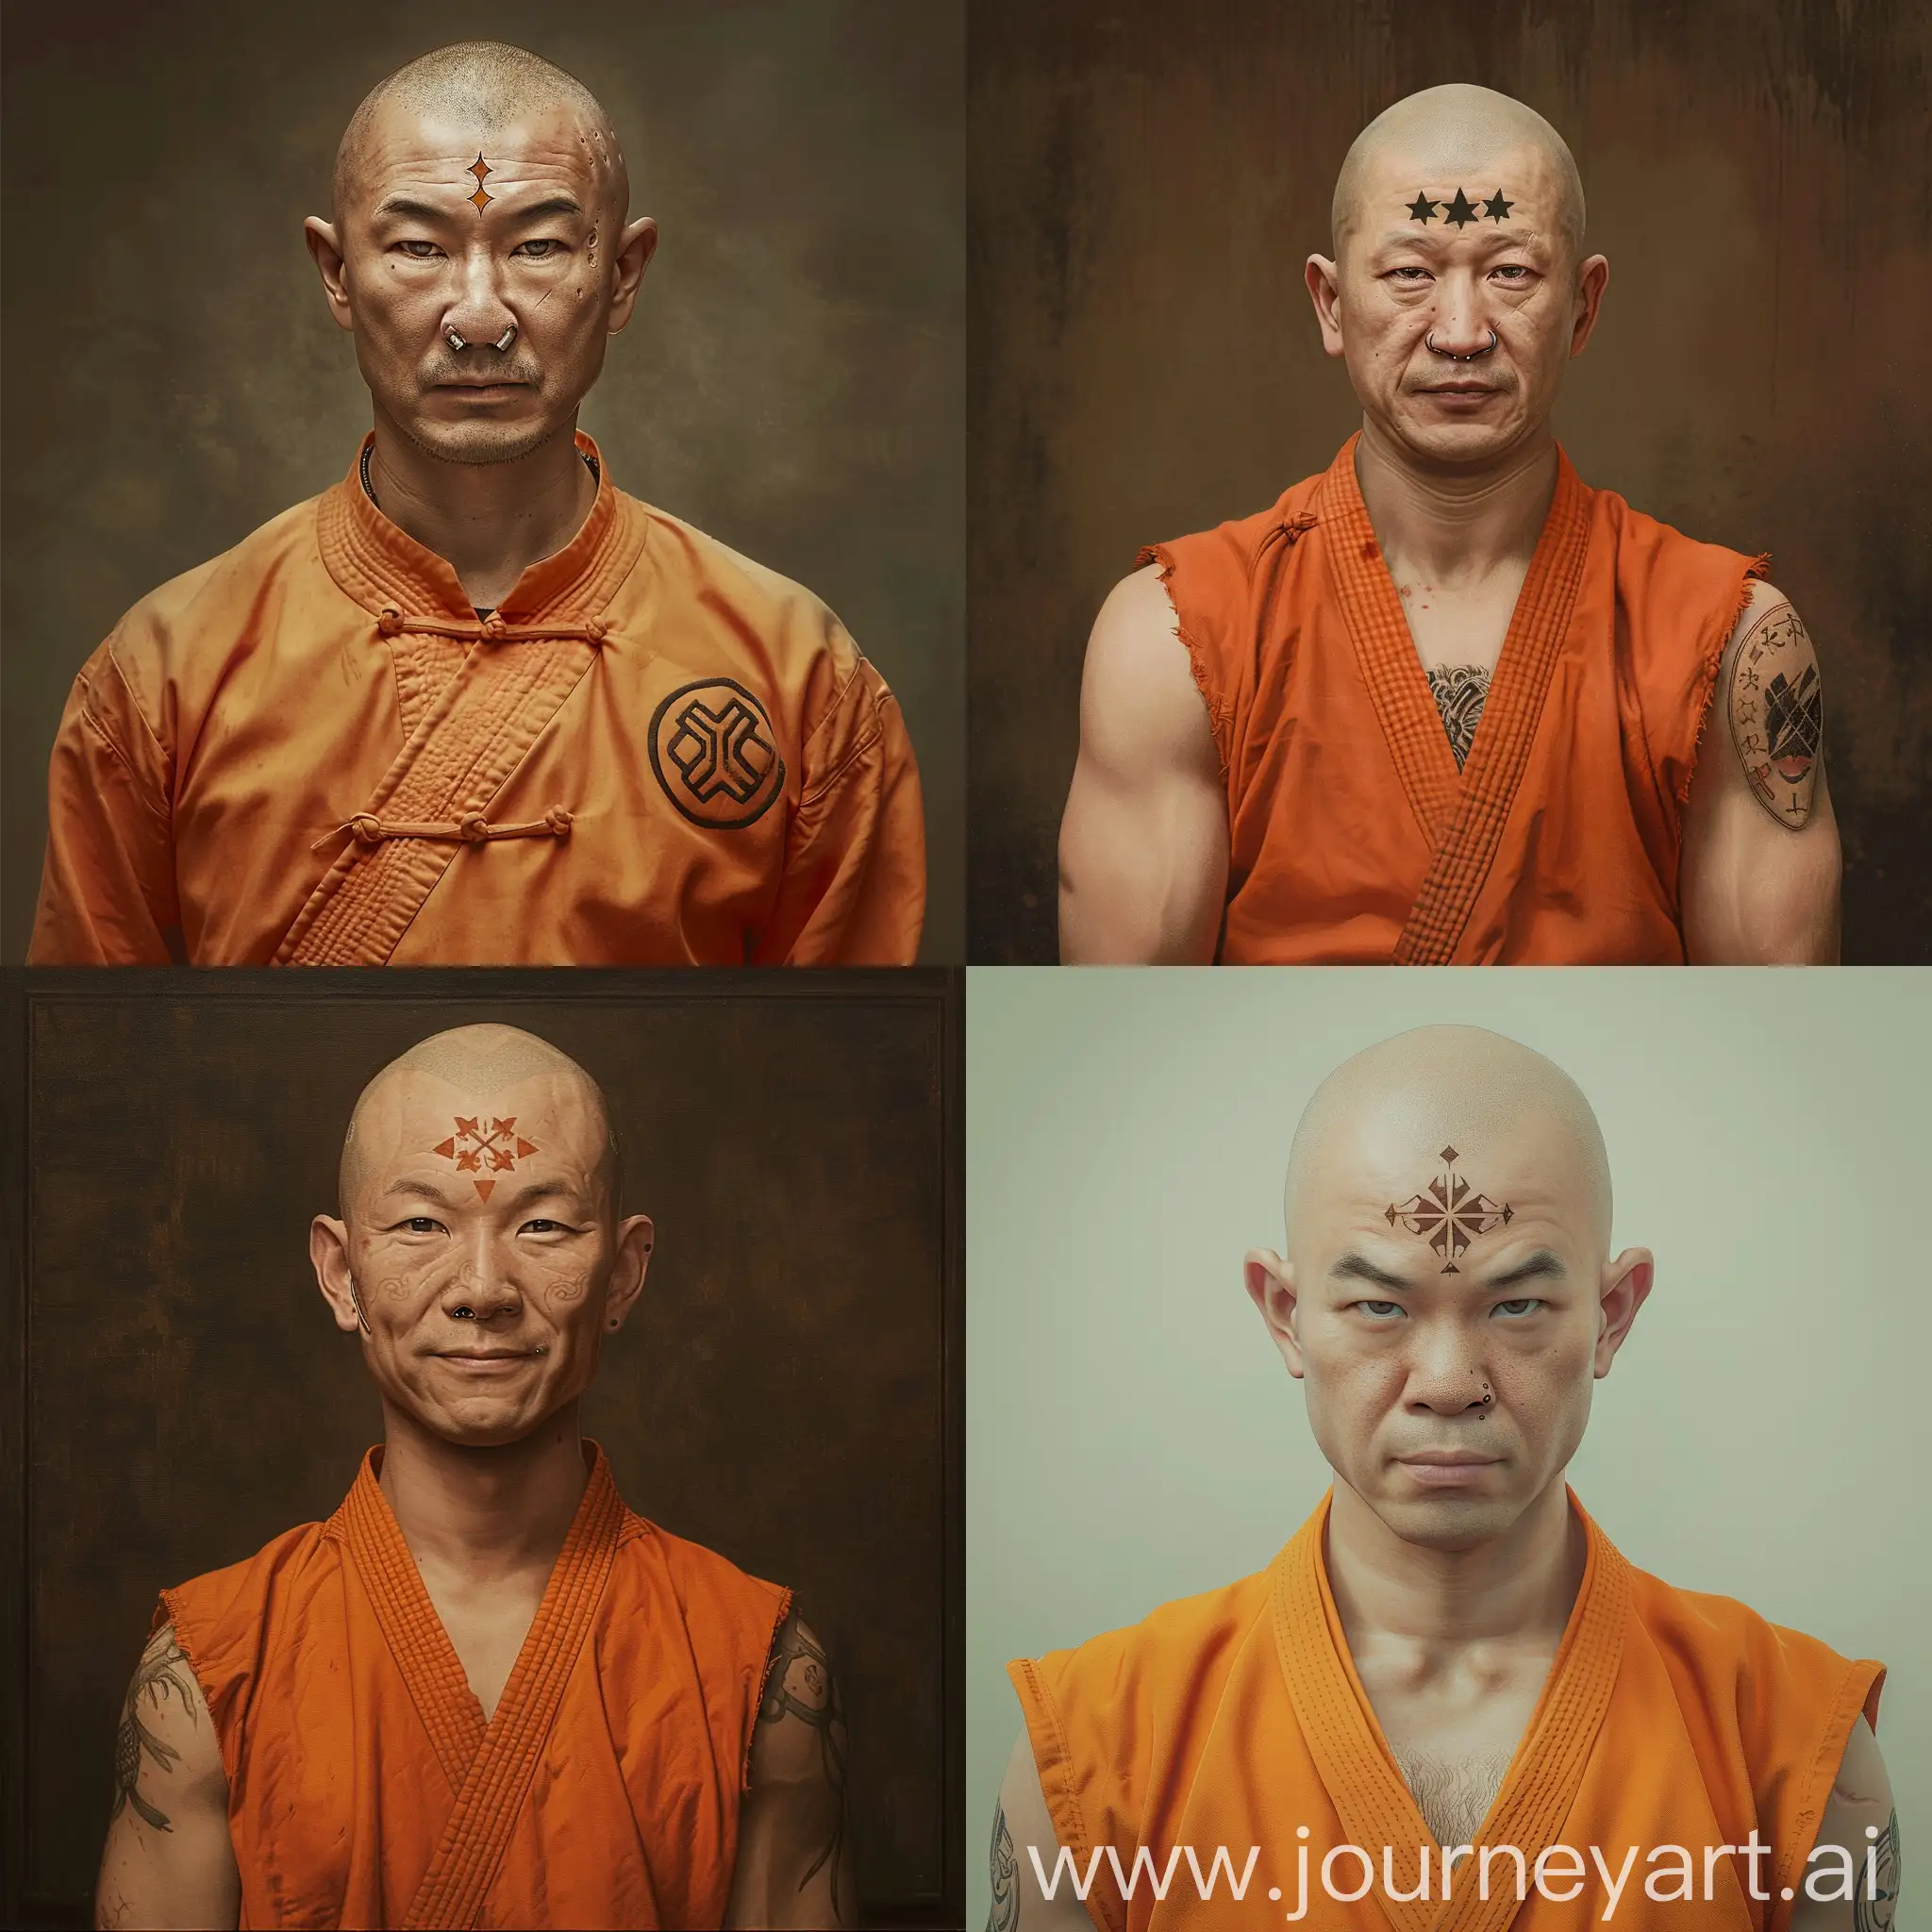 Portrait-of-a-Kind-Asian-Man-in-Orange-KungFu-Outfit-with-Unique-Tattoos